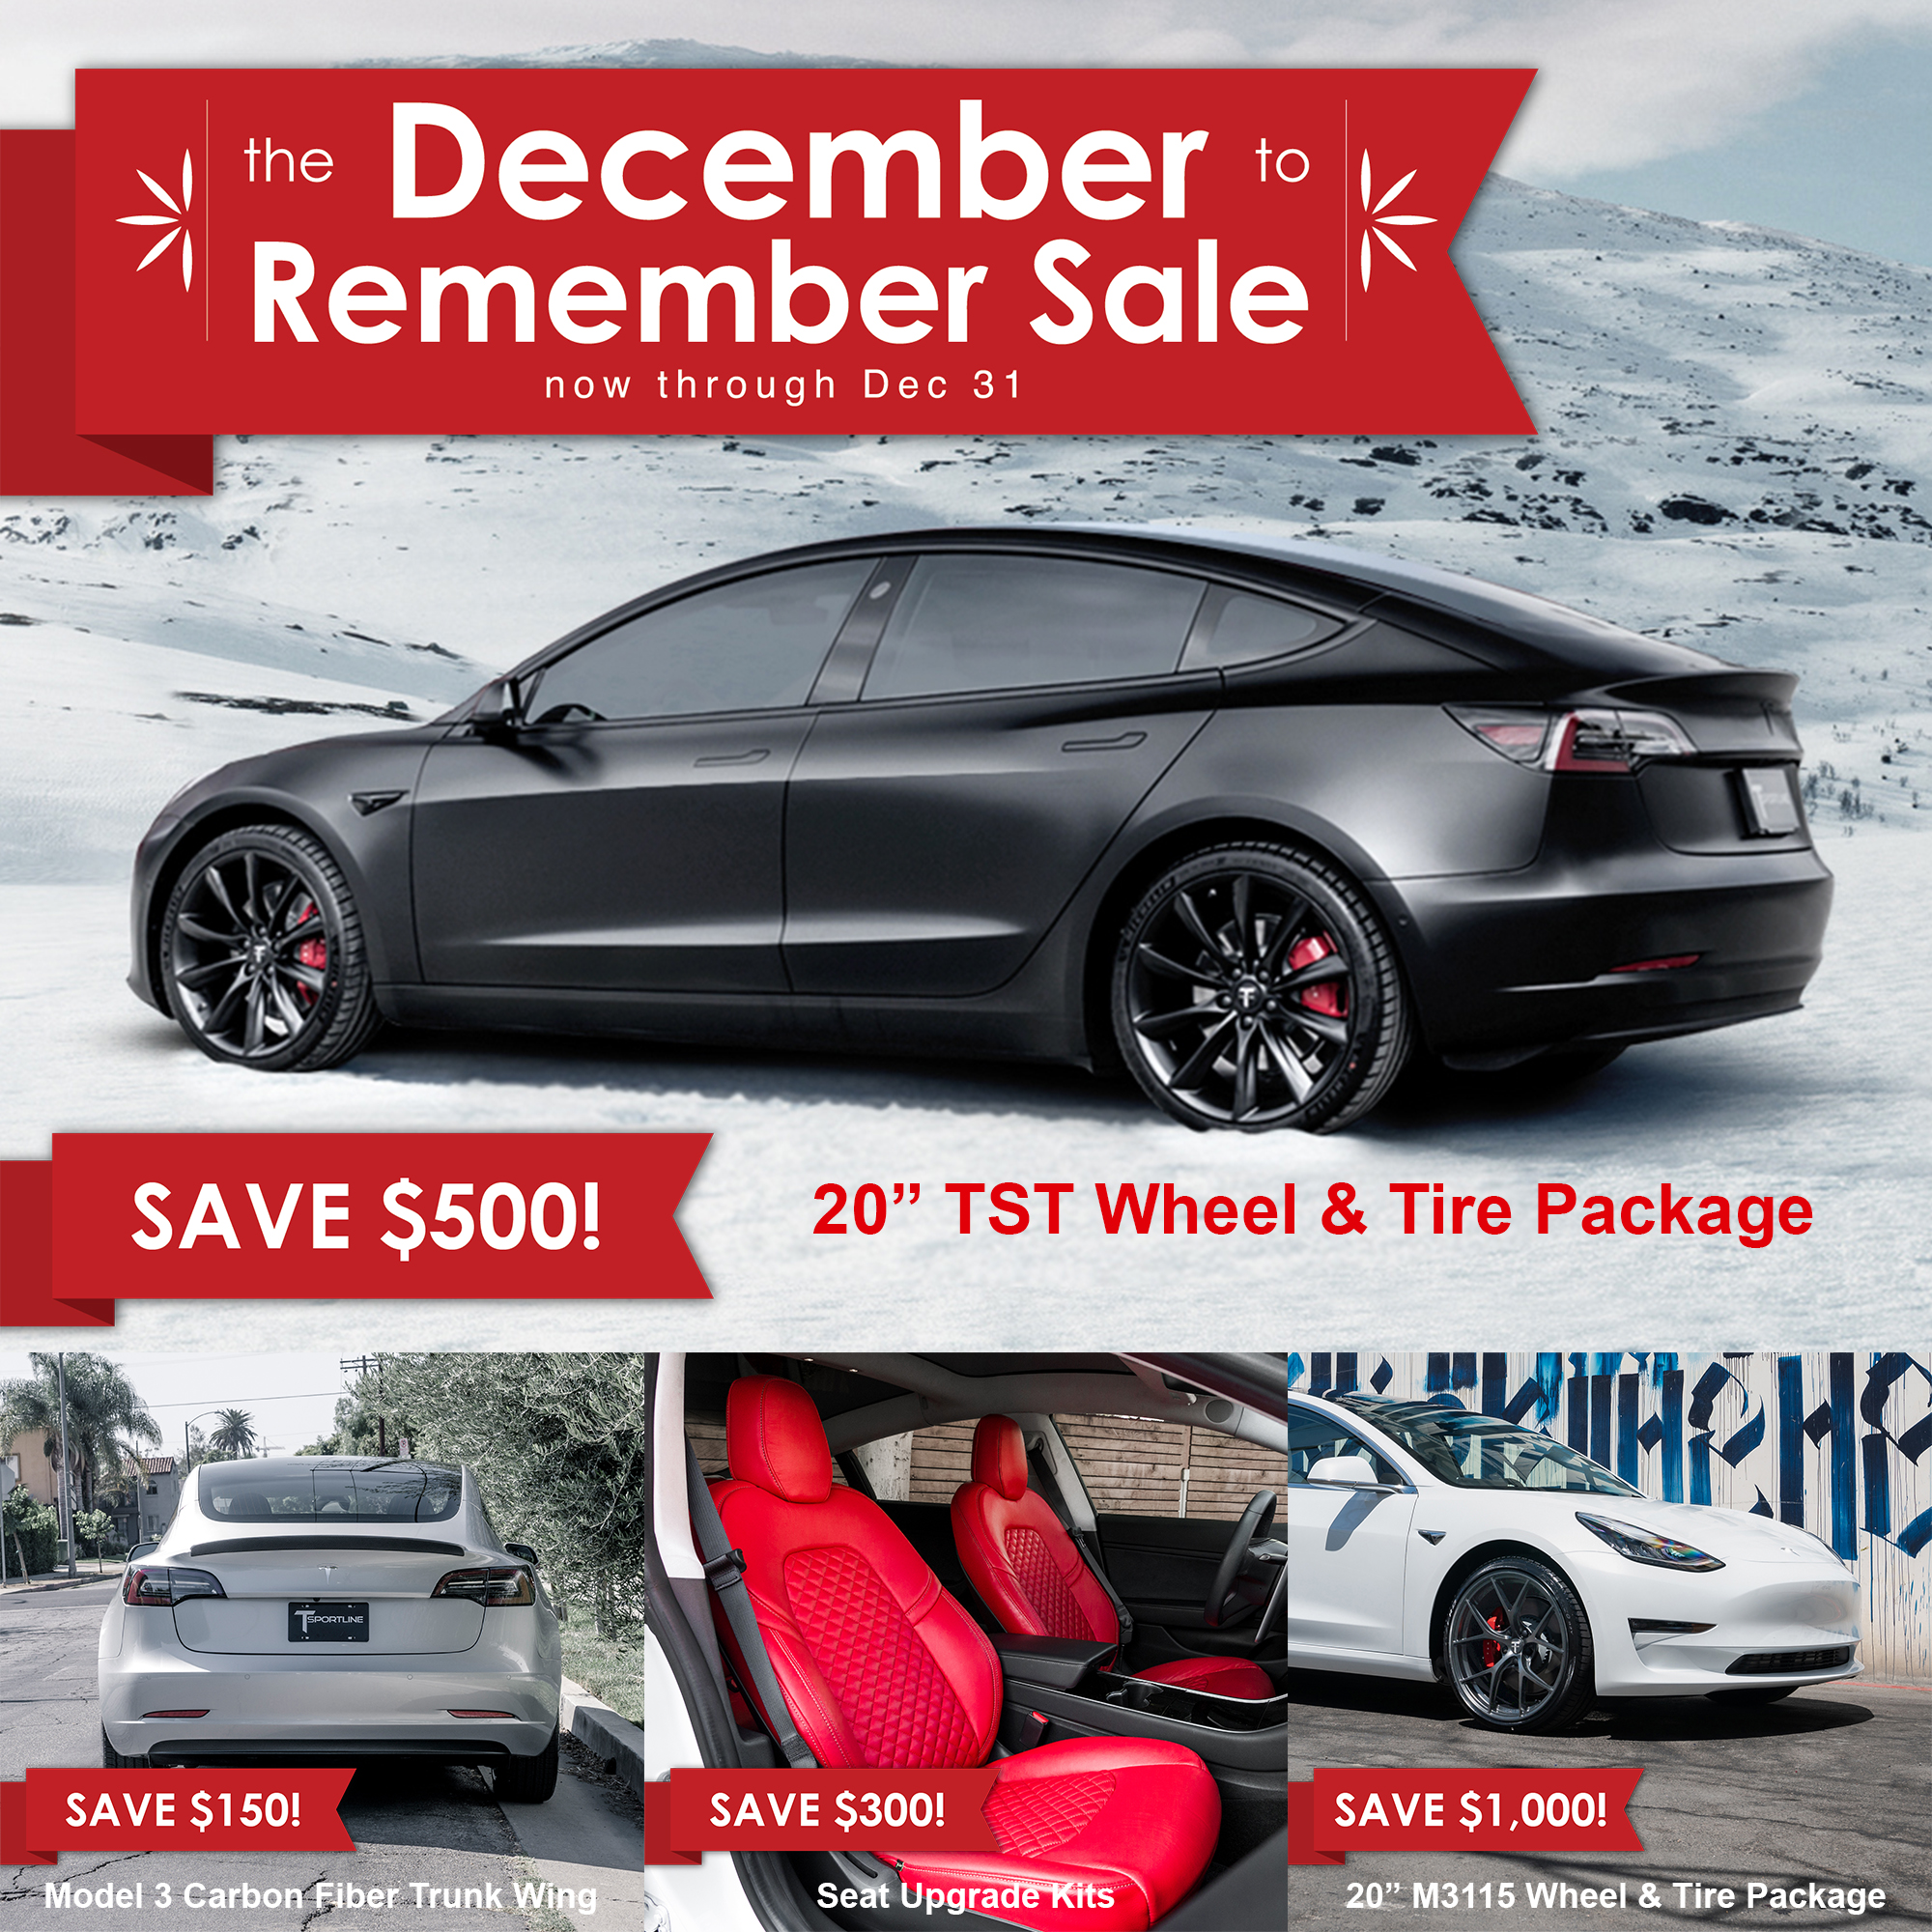 tesla-accessories-and-upgrades-december-to-remember-sale-squares-tesla-model-3-products.jpg